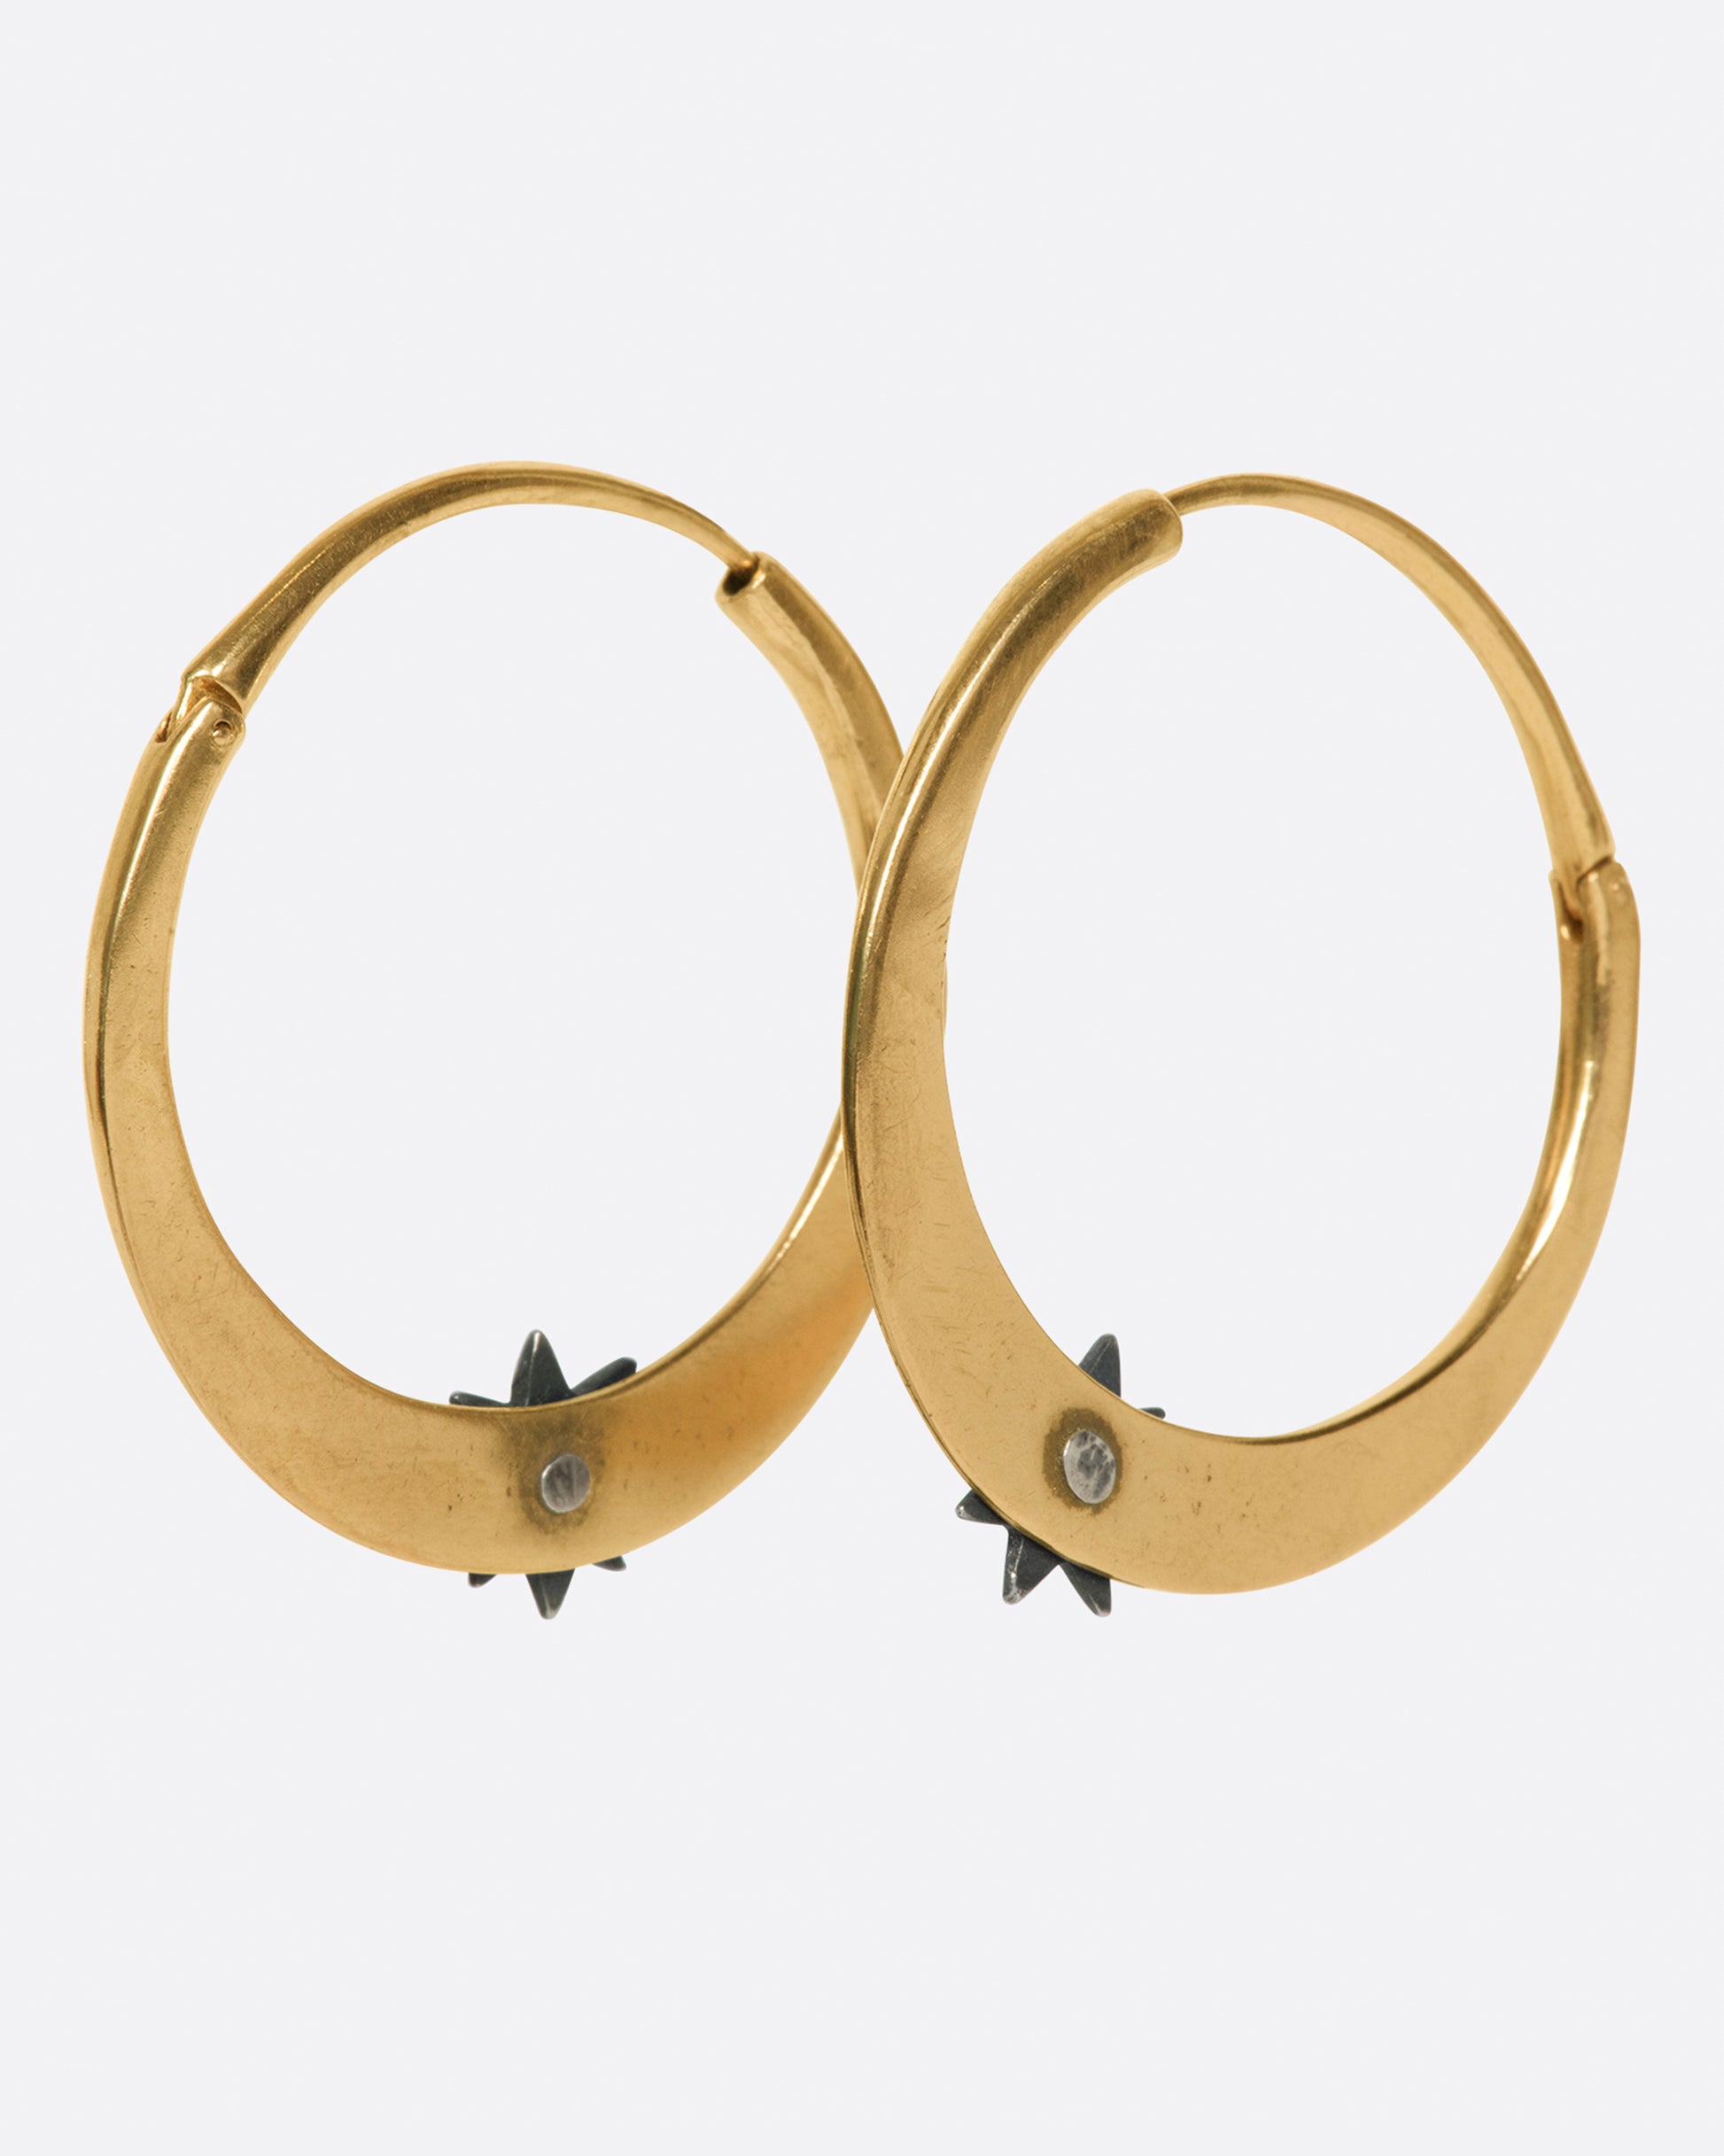 A pair of rose gold tapered hoop earrings with sterling silver stars at their base, shown from the back.